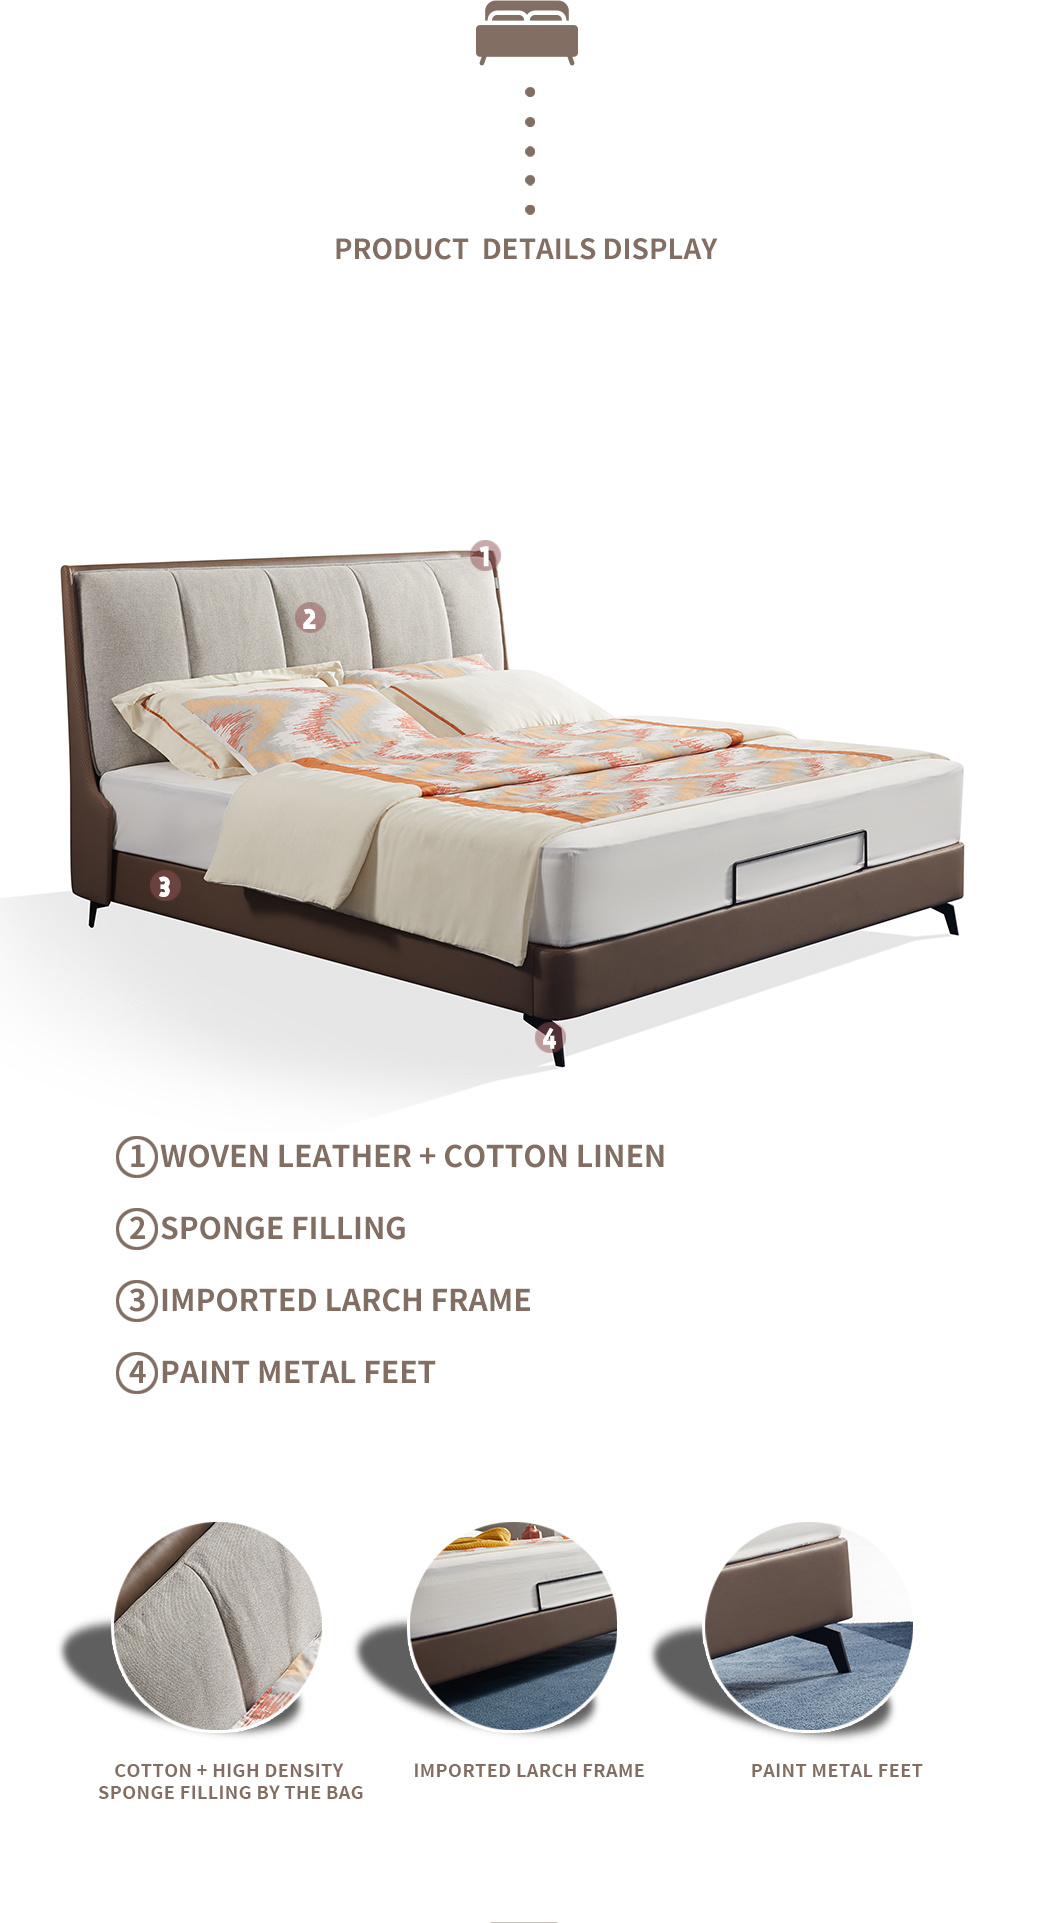 China Factory Light Luxury Fashion Home Hotel Leather Bed Bedroom Furniture